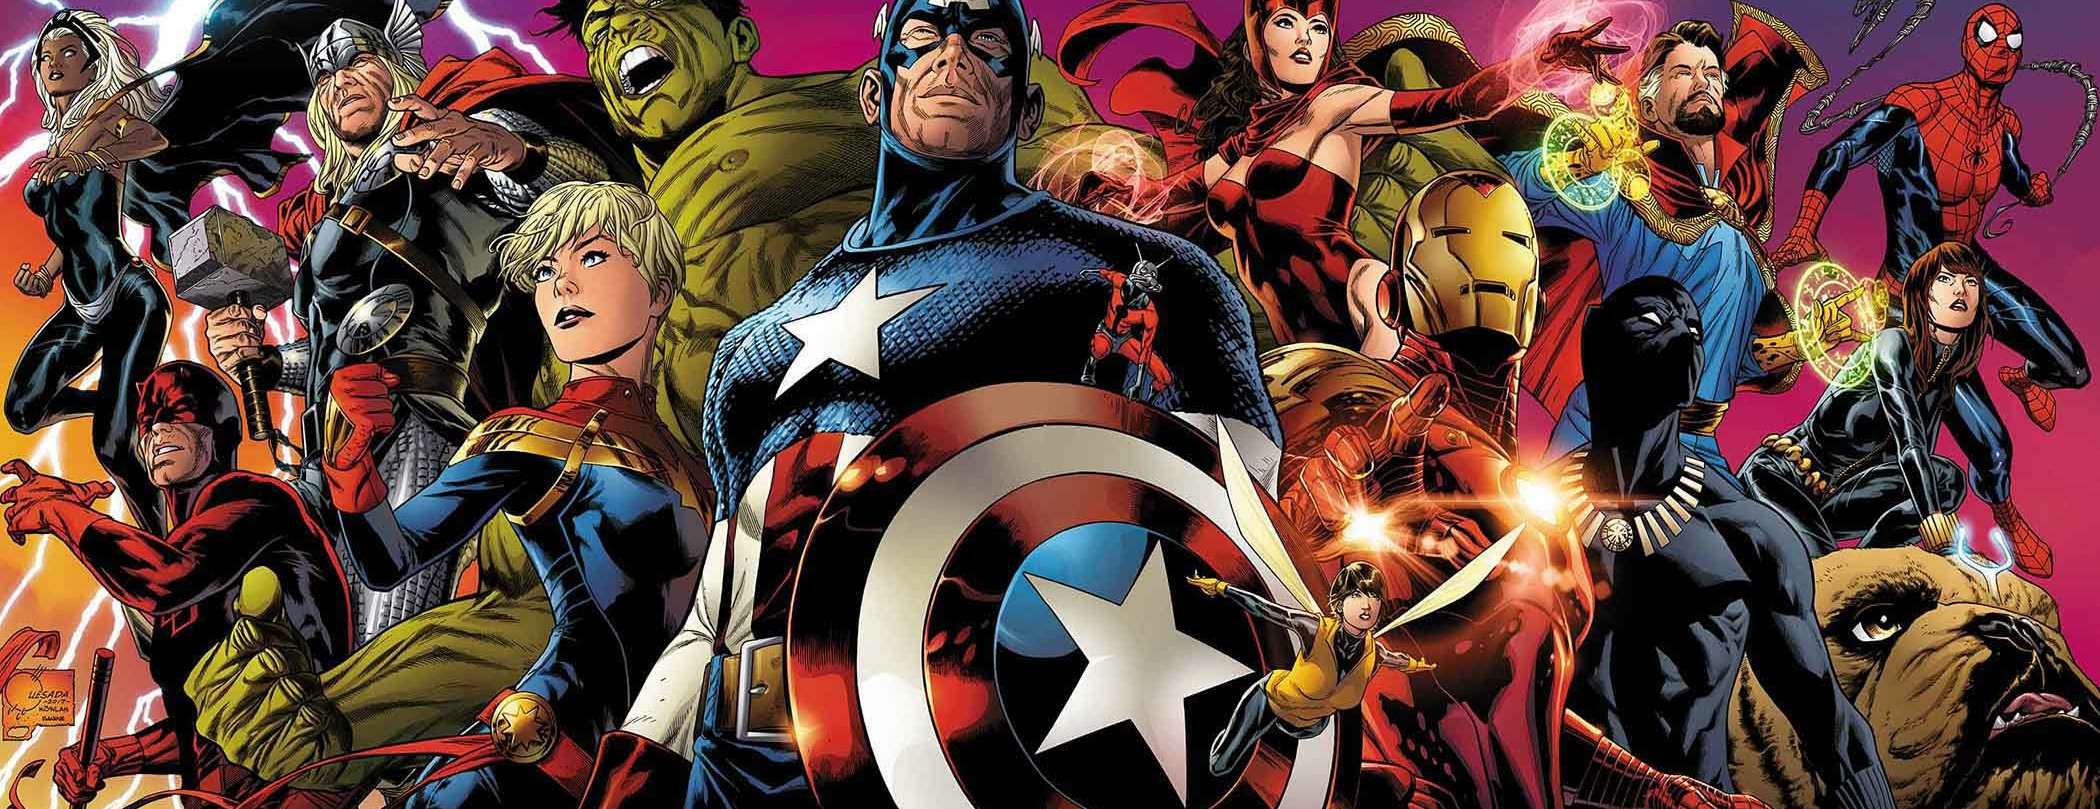 COMICS: Marvel Legacy #1 Promises To Showcase The True First Avengers From 1,000,000 BC